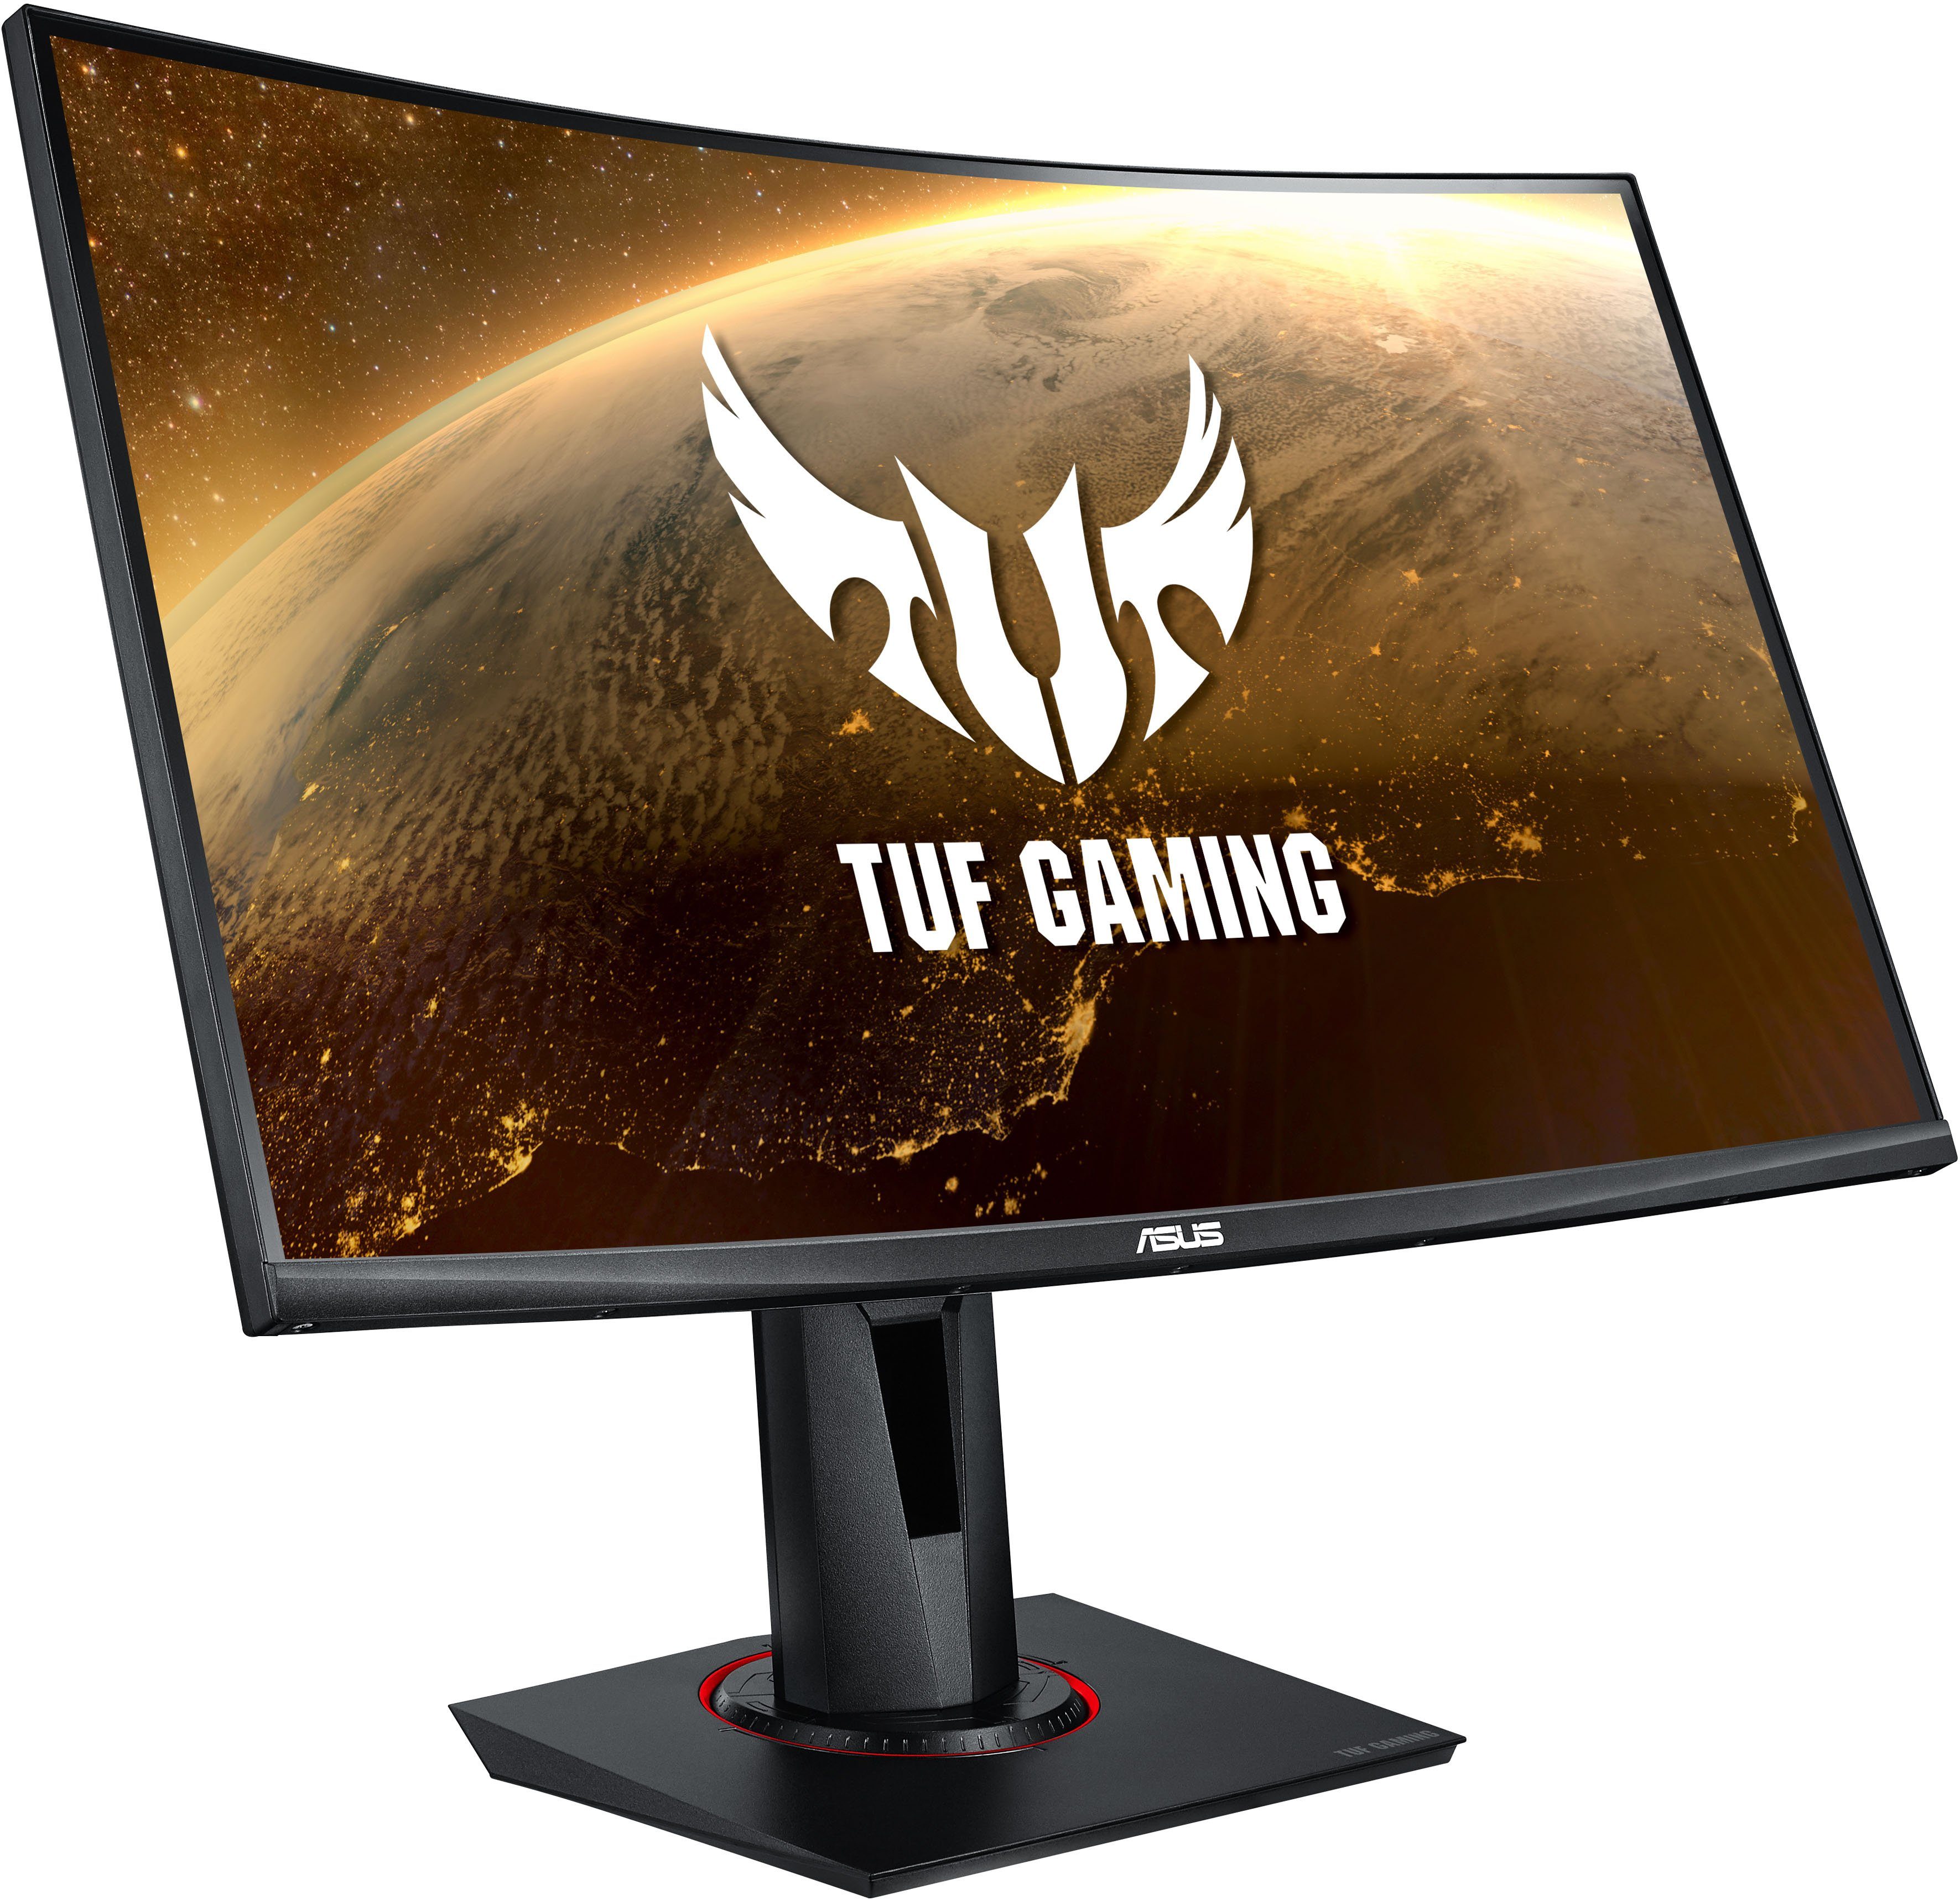 2560 ms WQHD, 1 165 VG27WQ Curved LED, Reaktionszeit, 1440 x Monitor) ", px, Curved-Gaming-Monitor Hz, Asus cm/27 (68,6